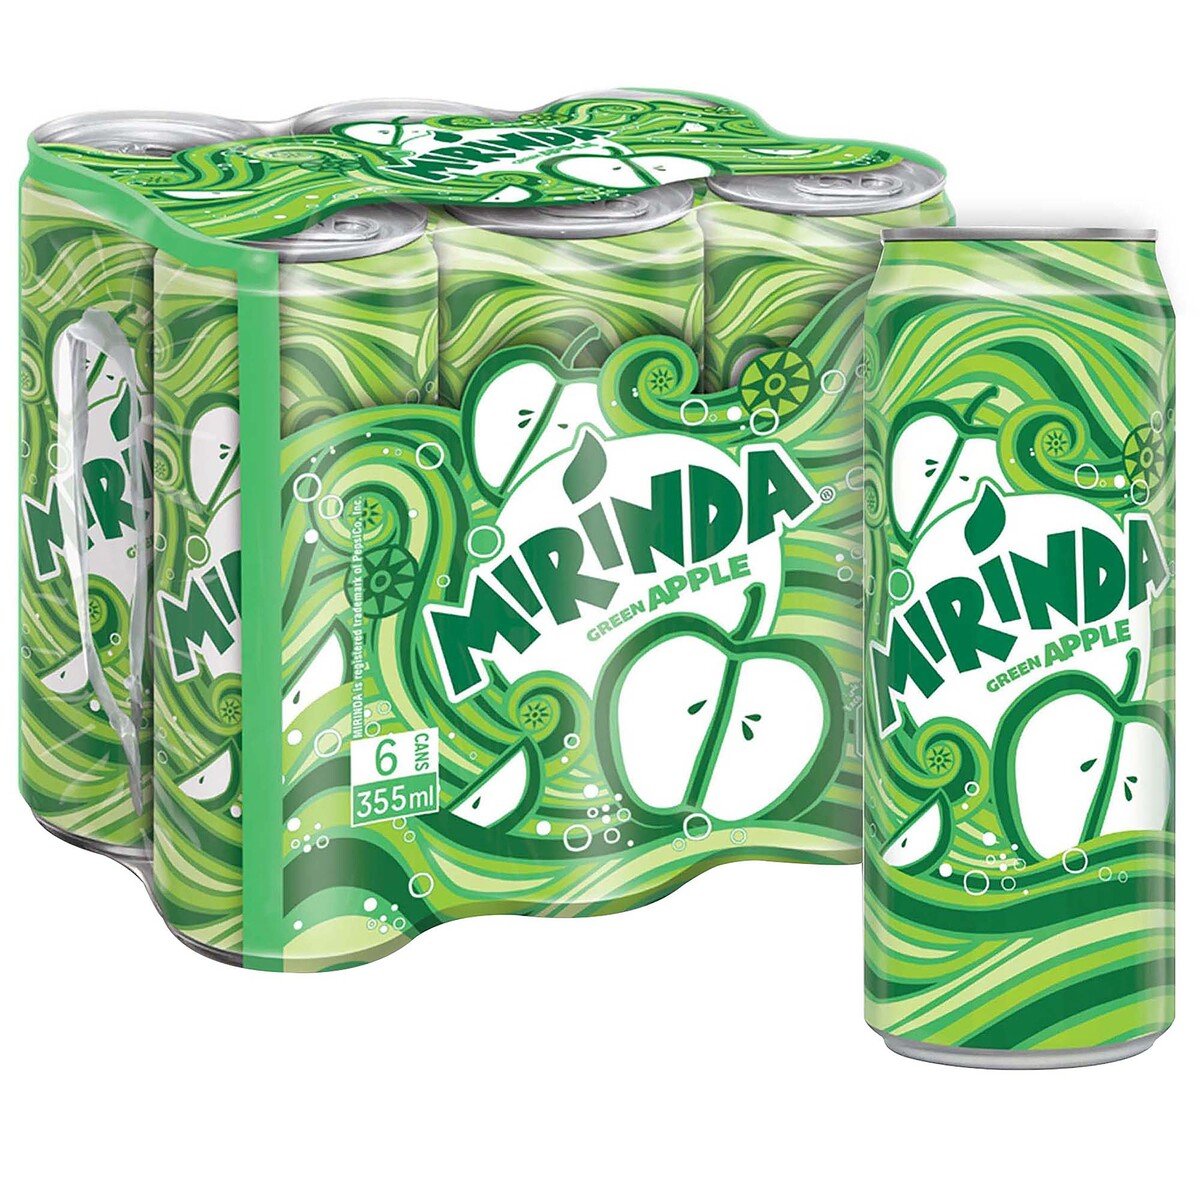 Mirinda Green Apple Carbonated Soft Drink Can 355 ml